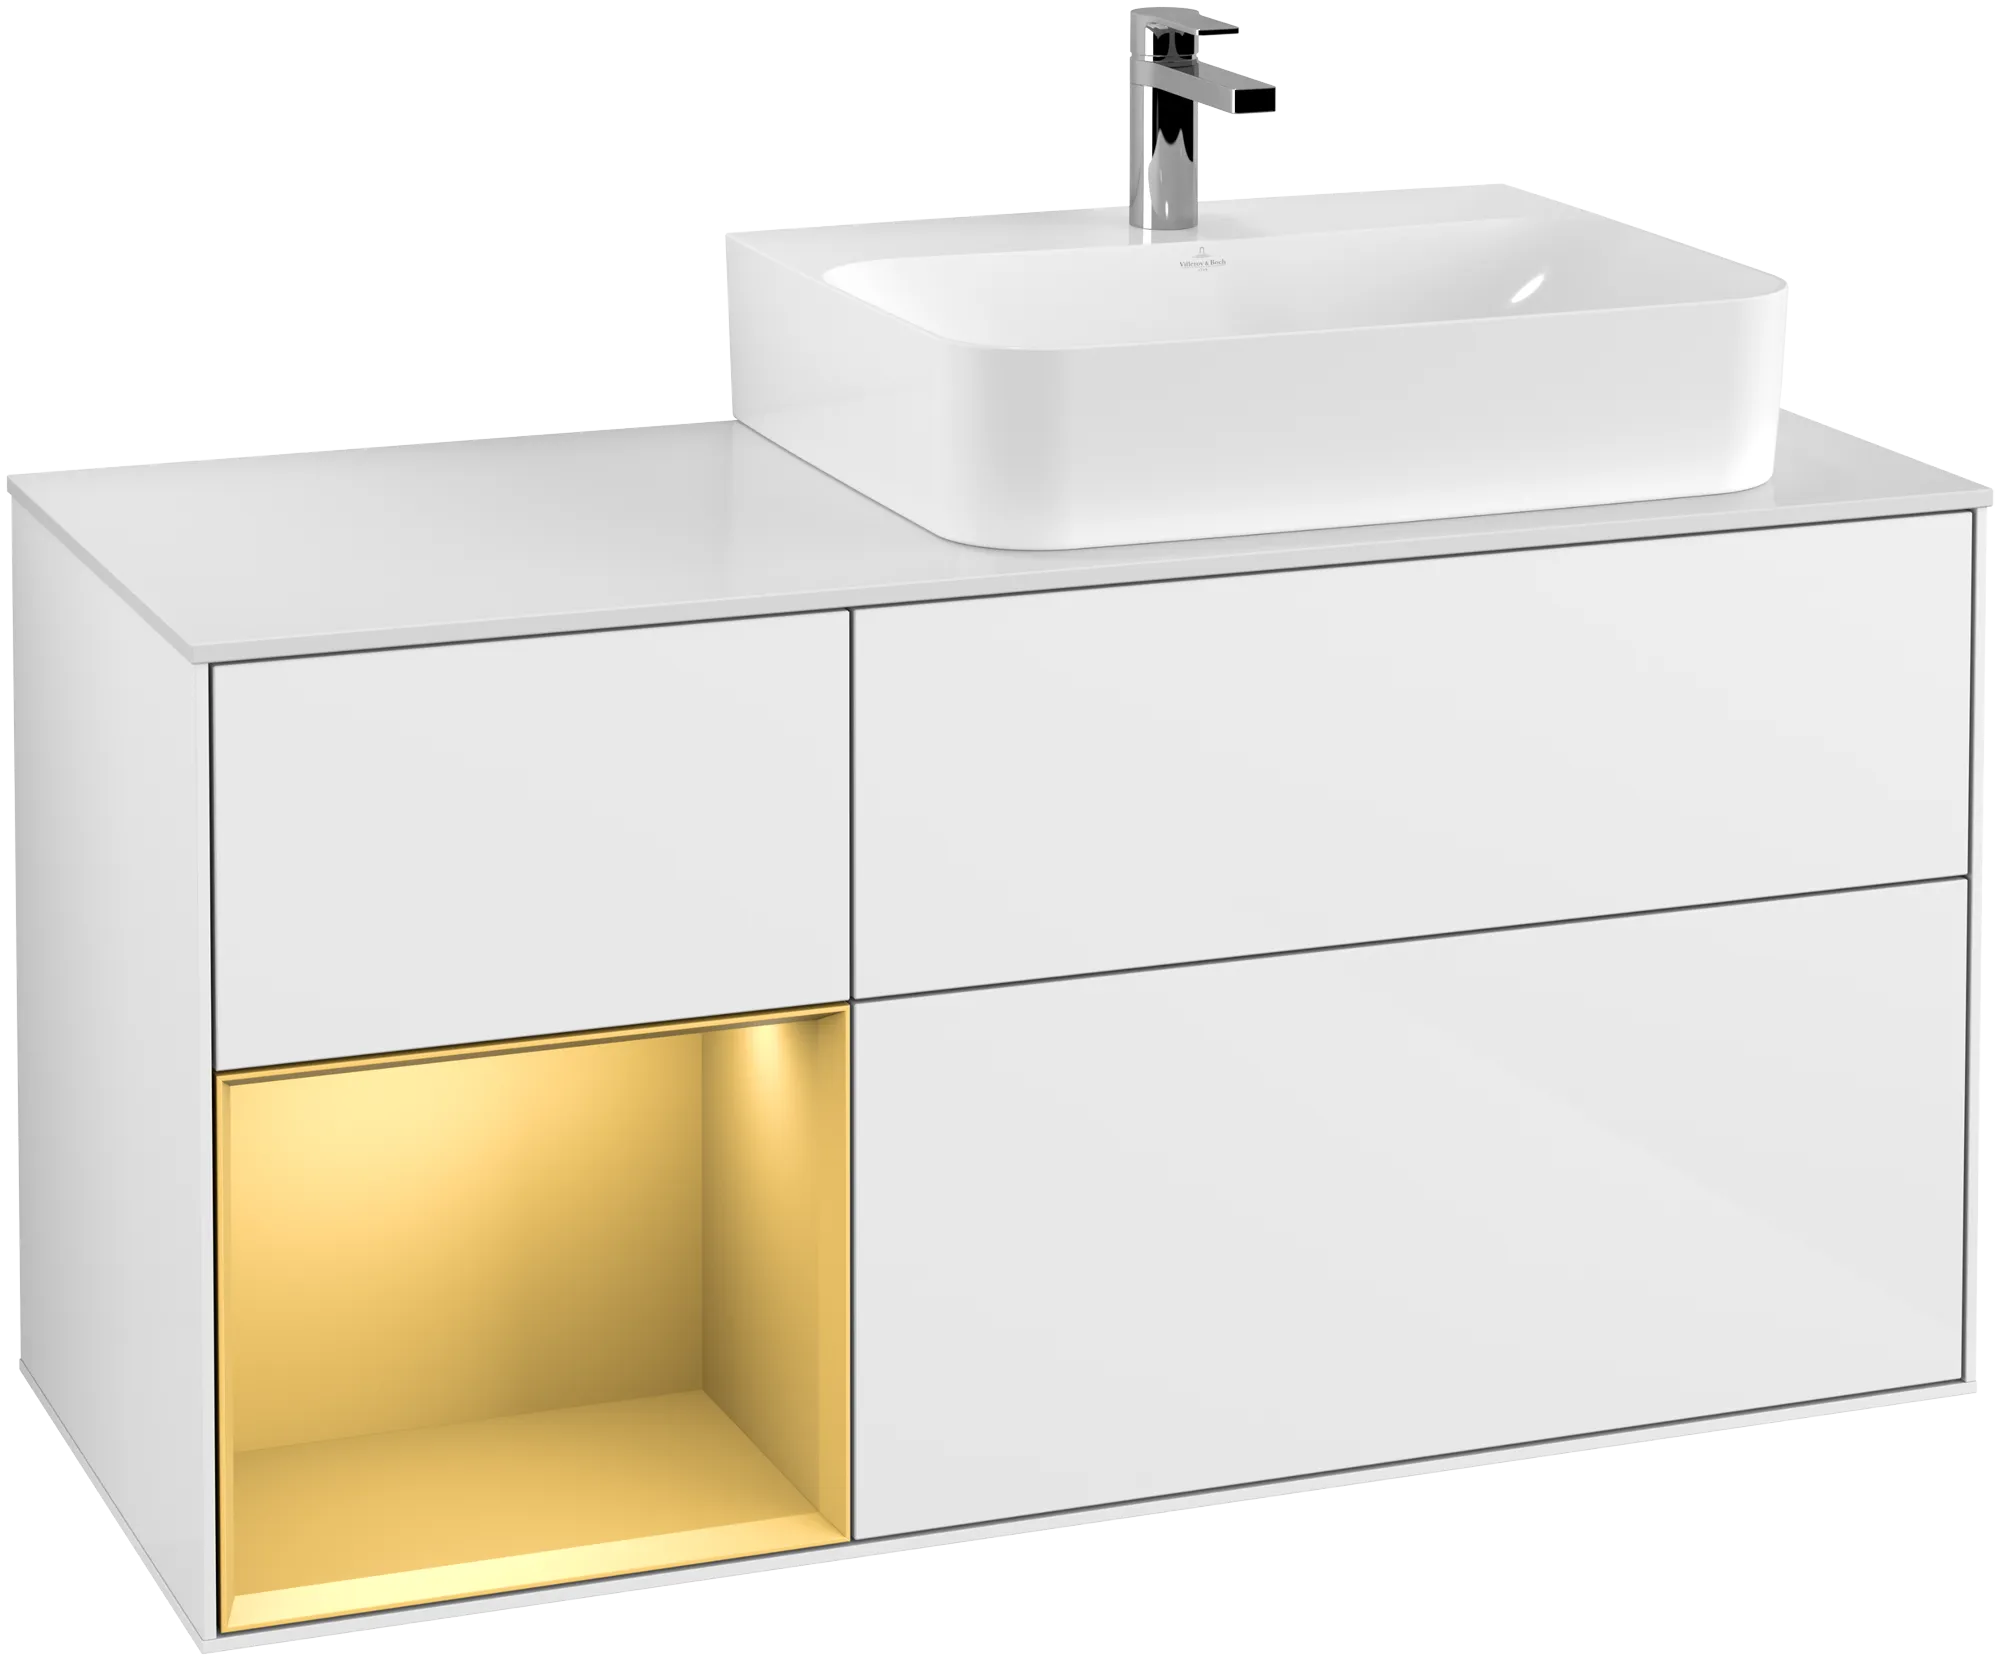 Picture of VILLEROY BOCH Finion Vanity unit, with lighting, 3 pull-out compartments, 1200 x 603 x 501 mm, Glossy White Lacquer / Gold Matt Lacquer / Glass White Matt #G141HFGF